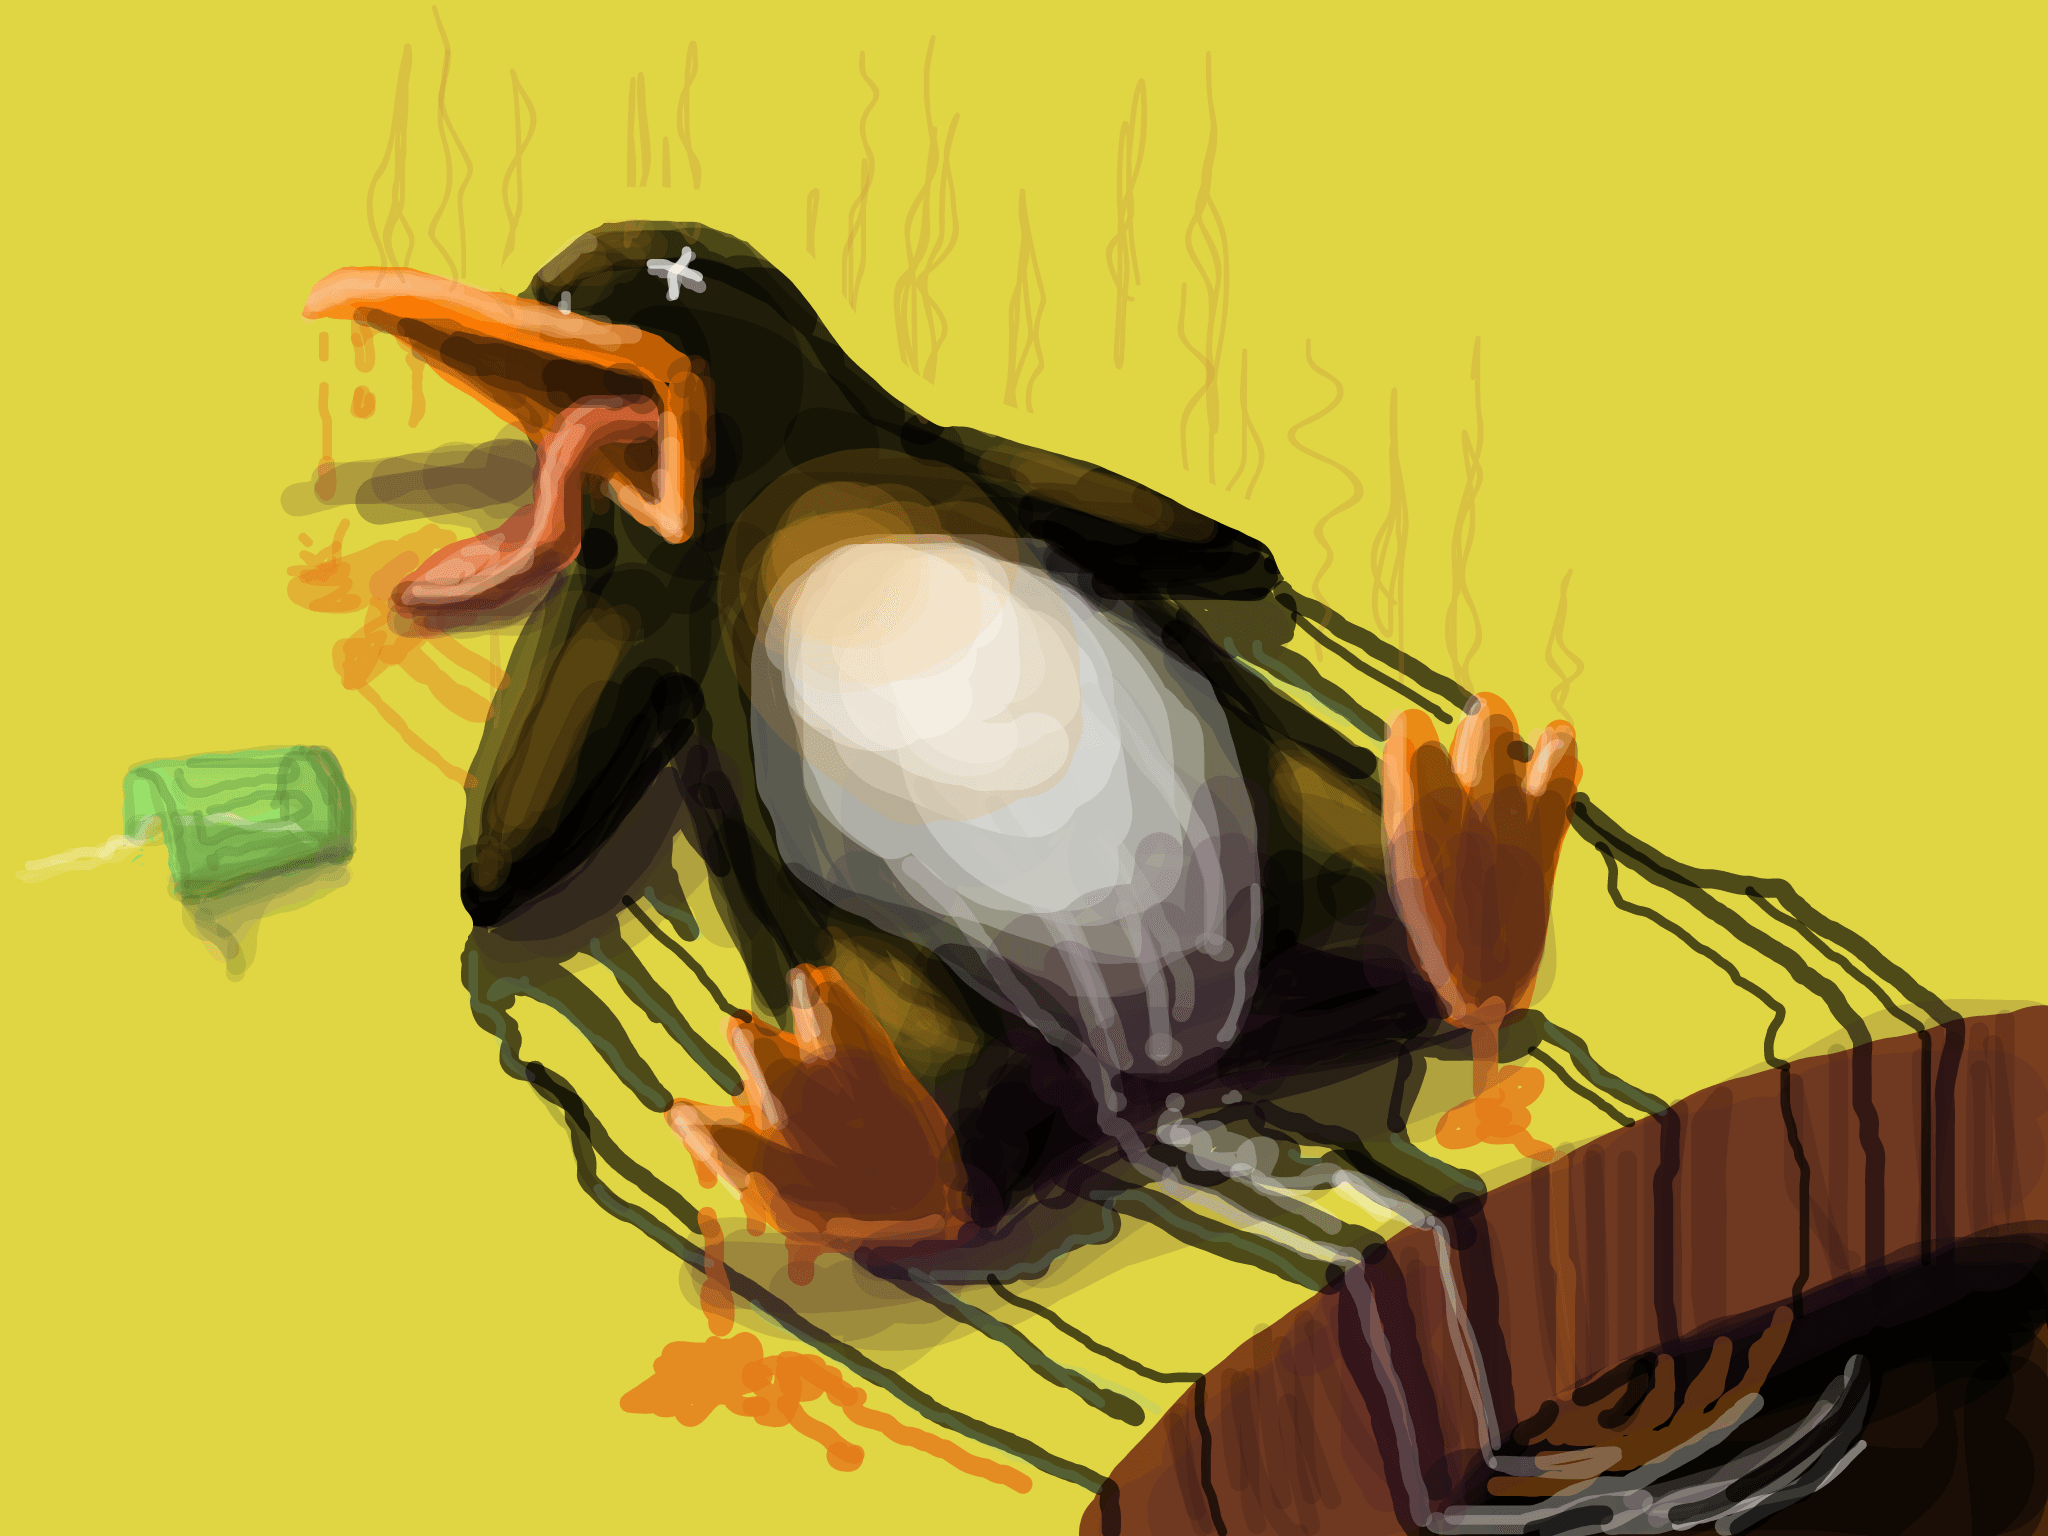 The Melted Penguin